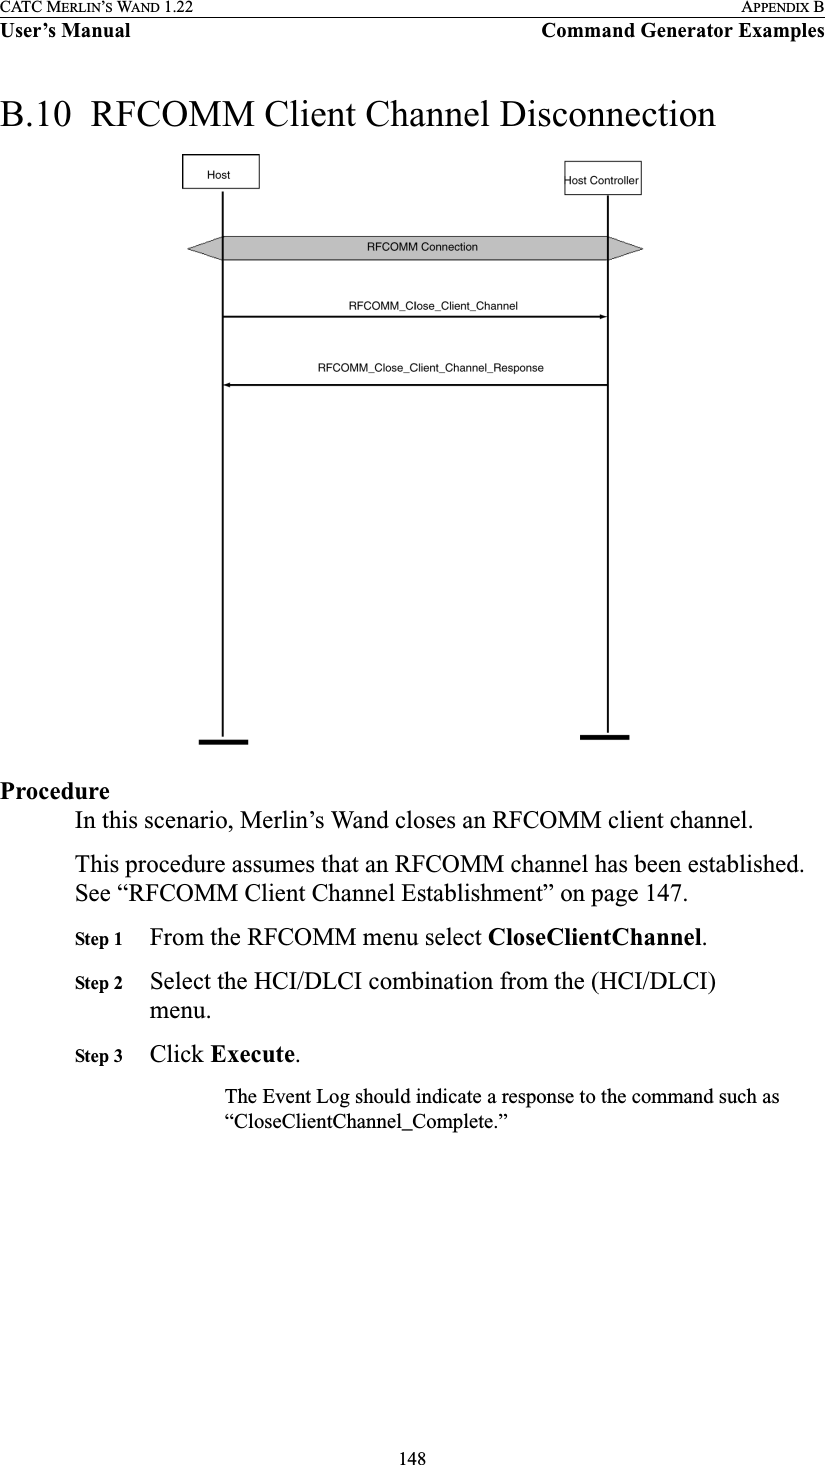 148CATC MERLIN’S WAND 1.22 APPENDIX BUser’s Manual Command Generator ExamplesB.10  RFCOMM Client Channel DisconnectionProcedureIn this scenario, Merlin’s Wand closes an RFCOMM client channel.This procedure assumes that an RFCOMM channel has been established. See “RFCOMM Client Channel Establishment” on page 147.Step 1 From the RFCOMM menu select CloseClientChannel.Step 2 Select the HCI/DLCI combination from the (HCI/DLCI) menu.Step 3 Click Execute.The Event Log should indicate a response to the command such as “CloseClientChannel_Complete.”